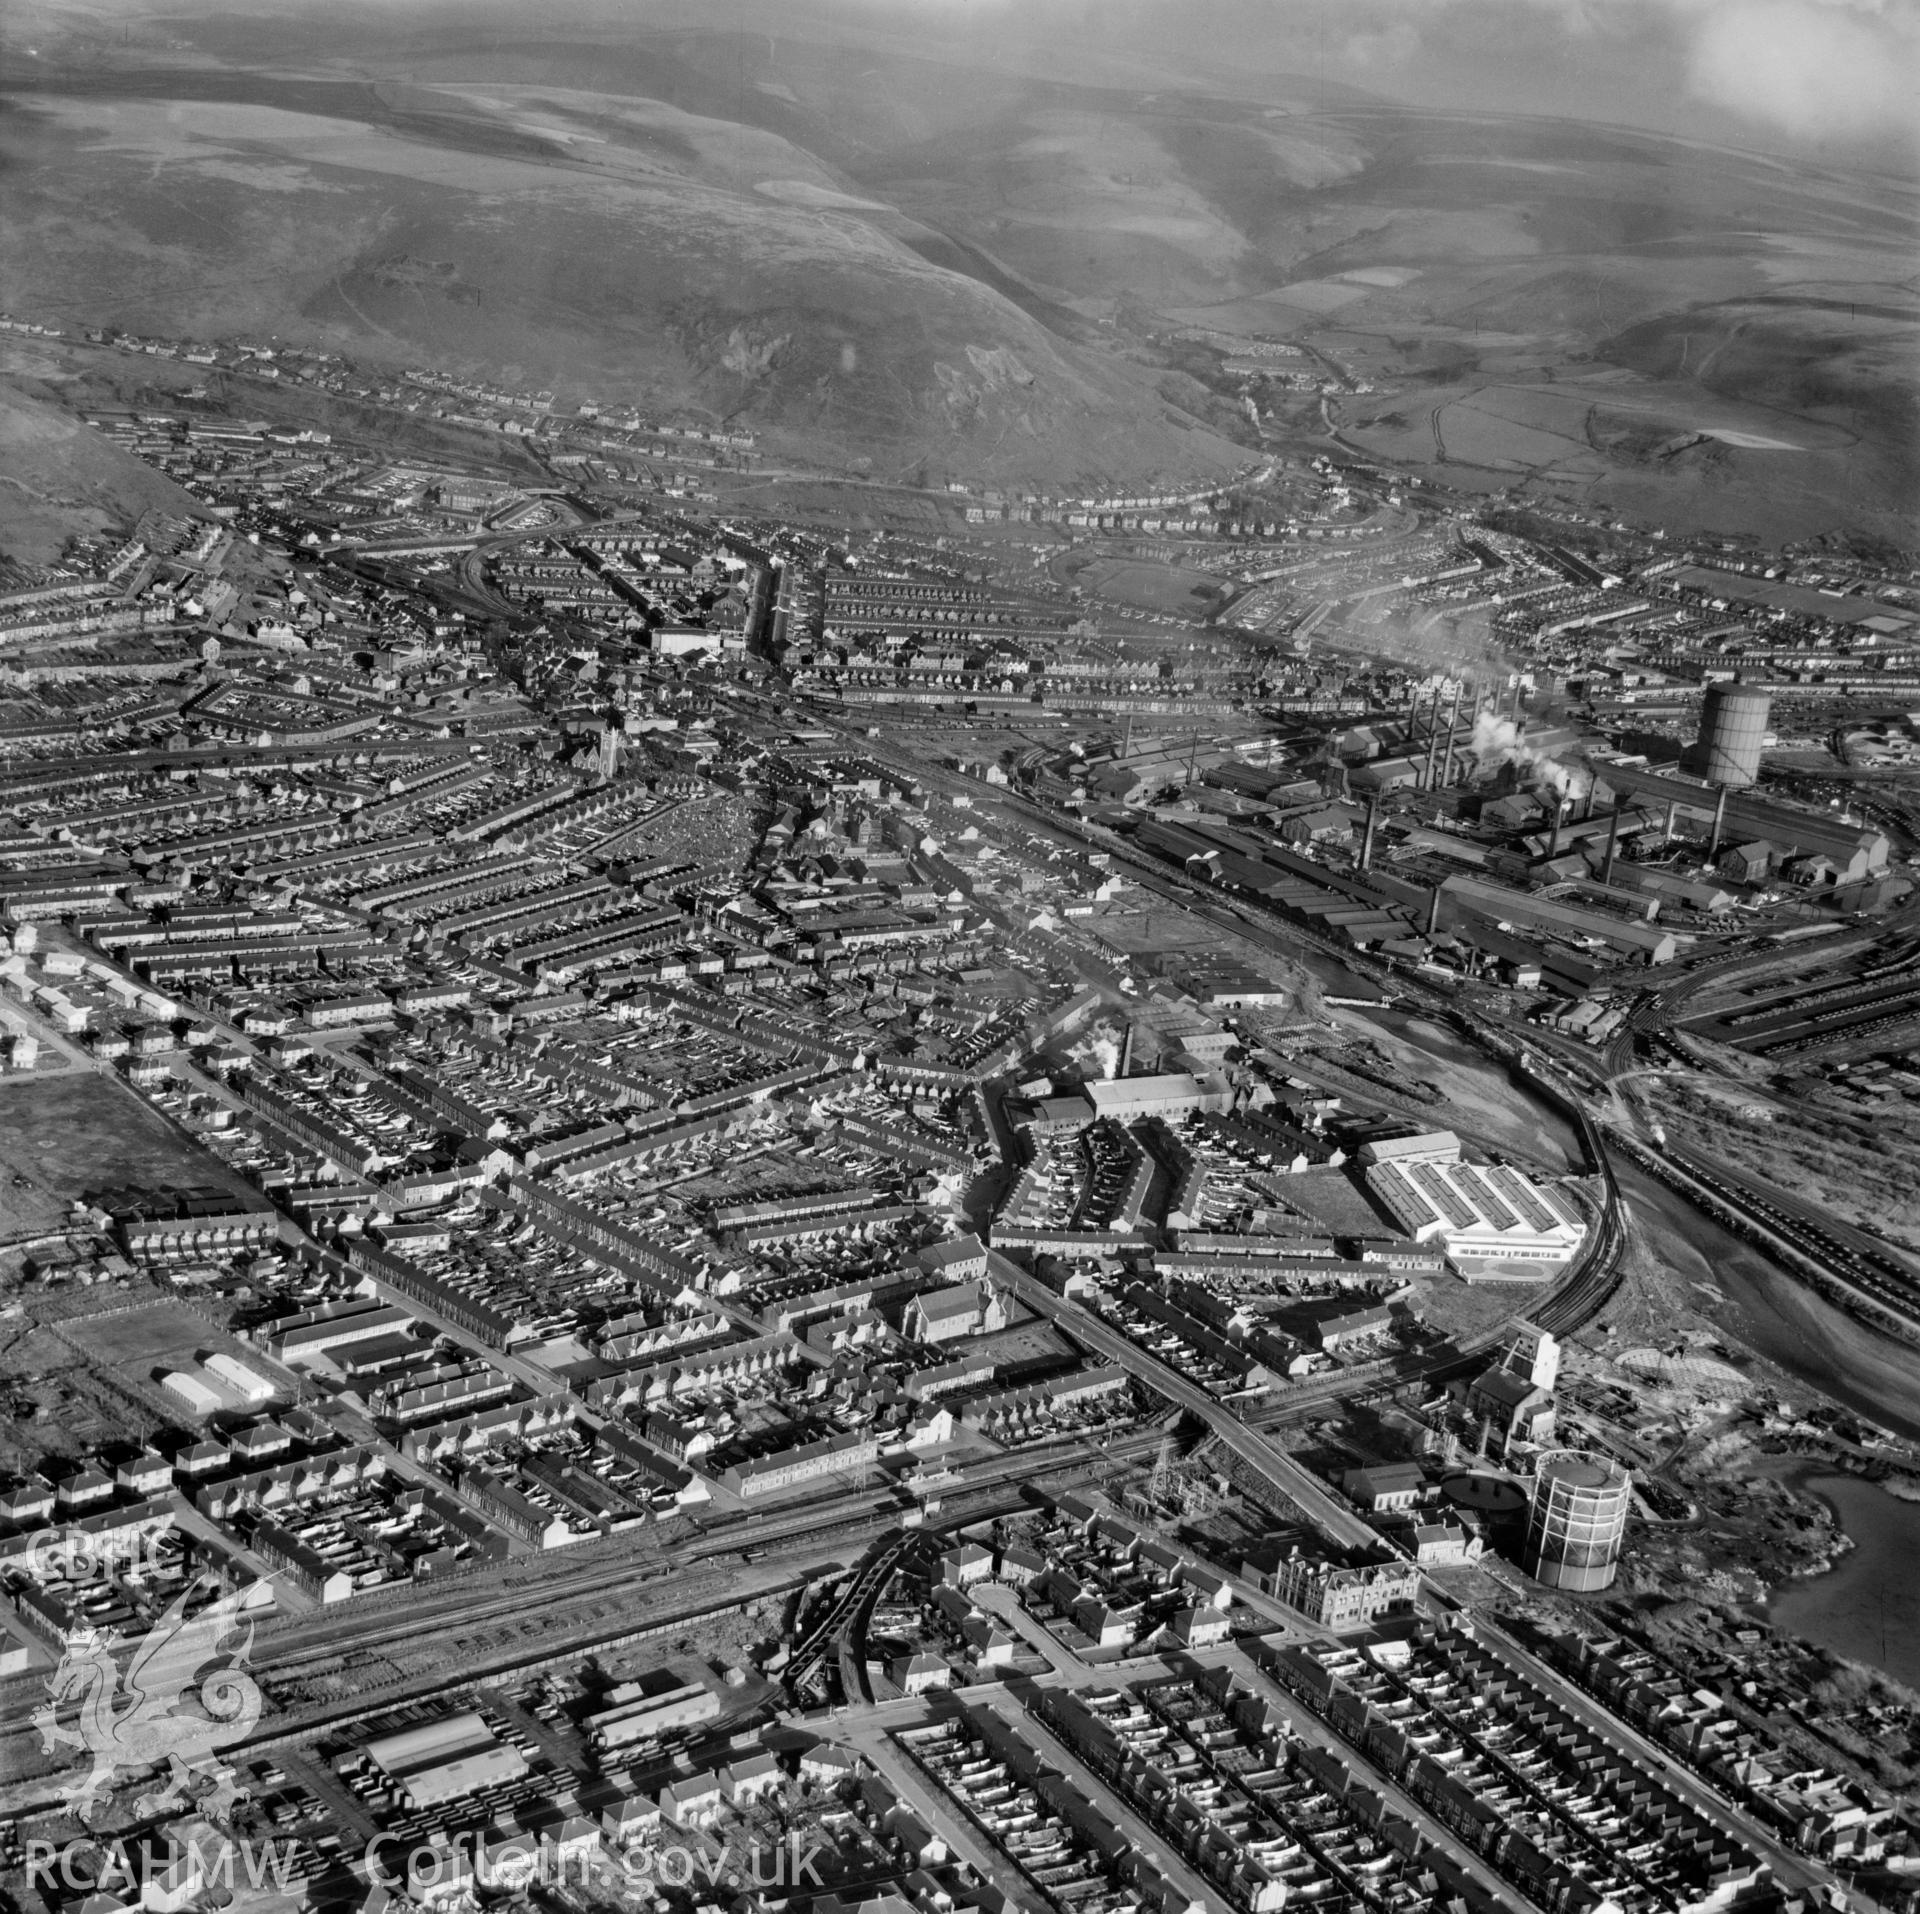 General view of Port Talbot